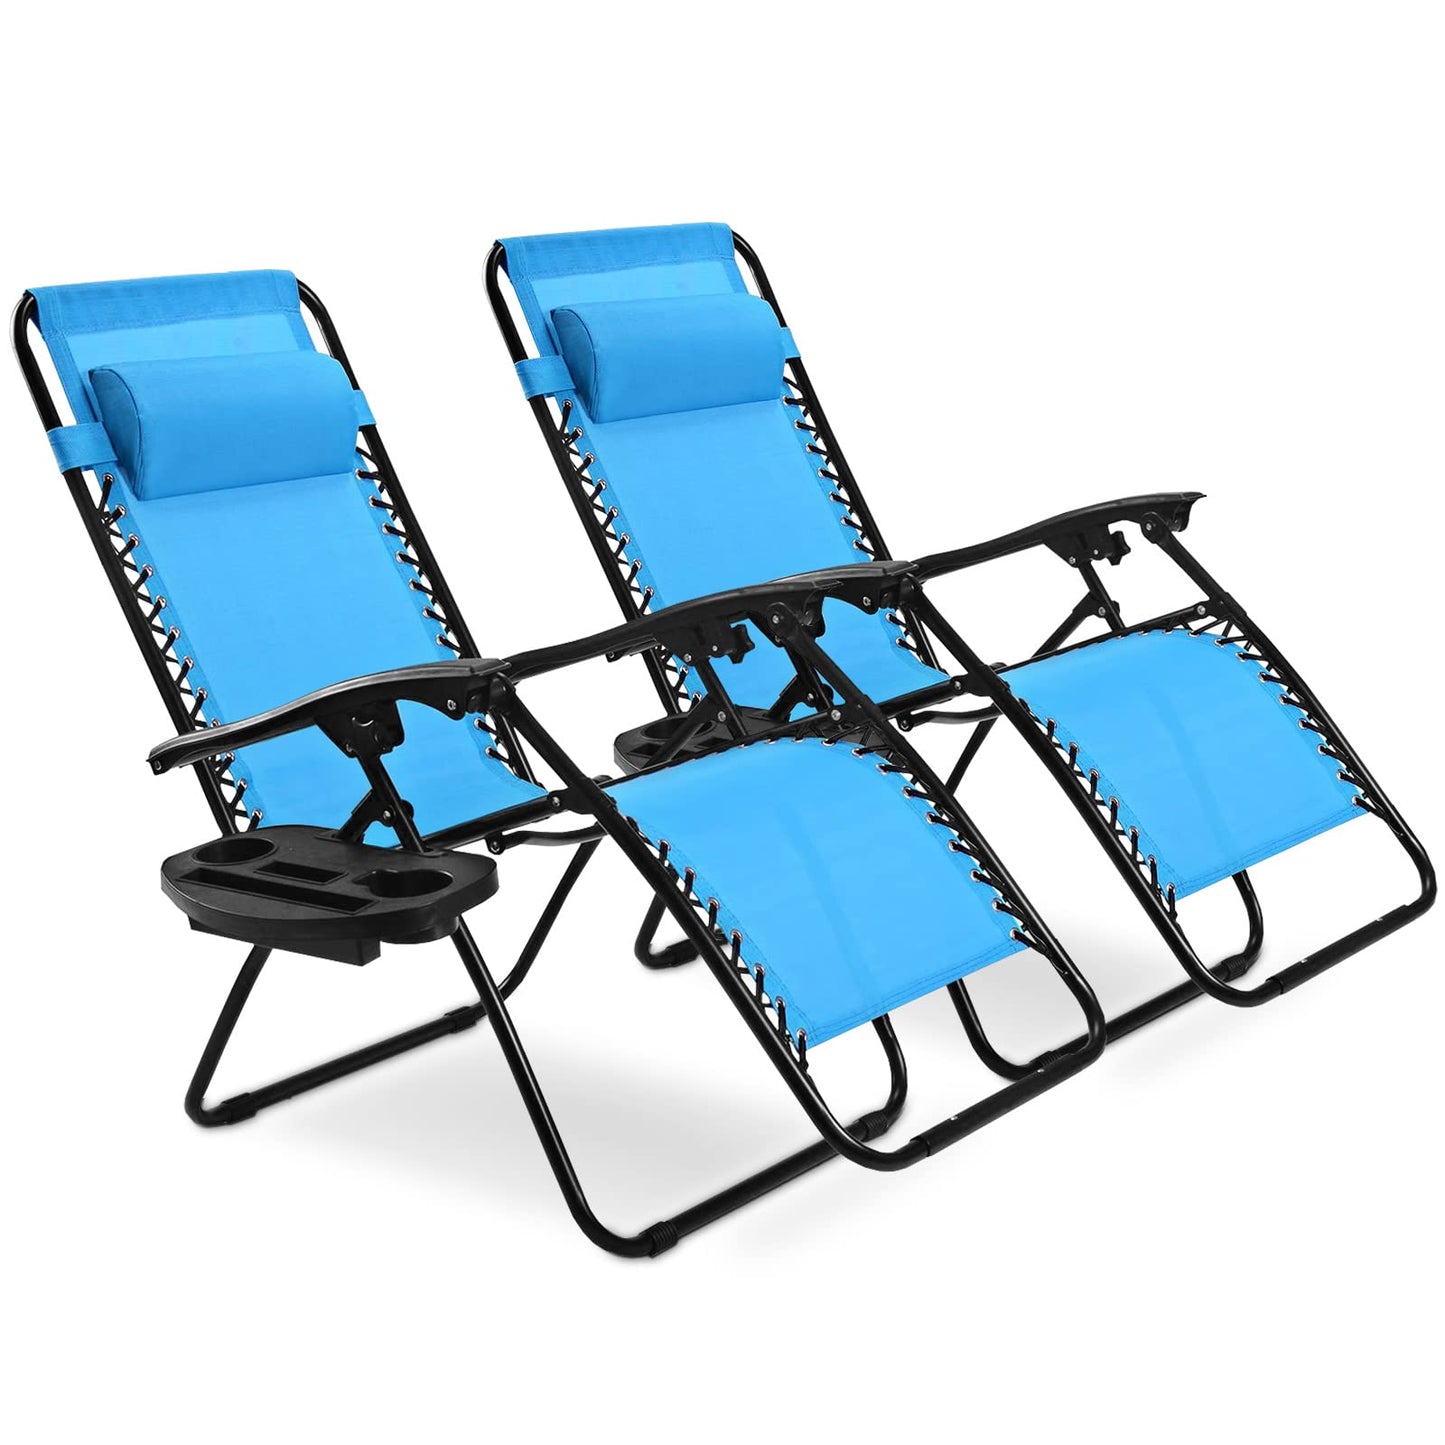 Goplus Zero Gravity Chair, Adjustable Folding Reclining Lounge Chair with Pillow and Cup Holder, Patio Lawn Recliner for Outdoor Pool Camp Yard (Set of 2, Light Blue) set of 2